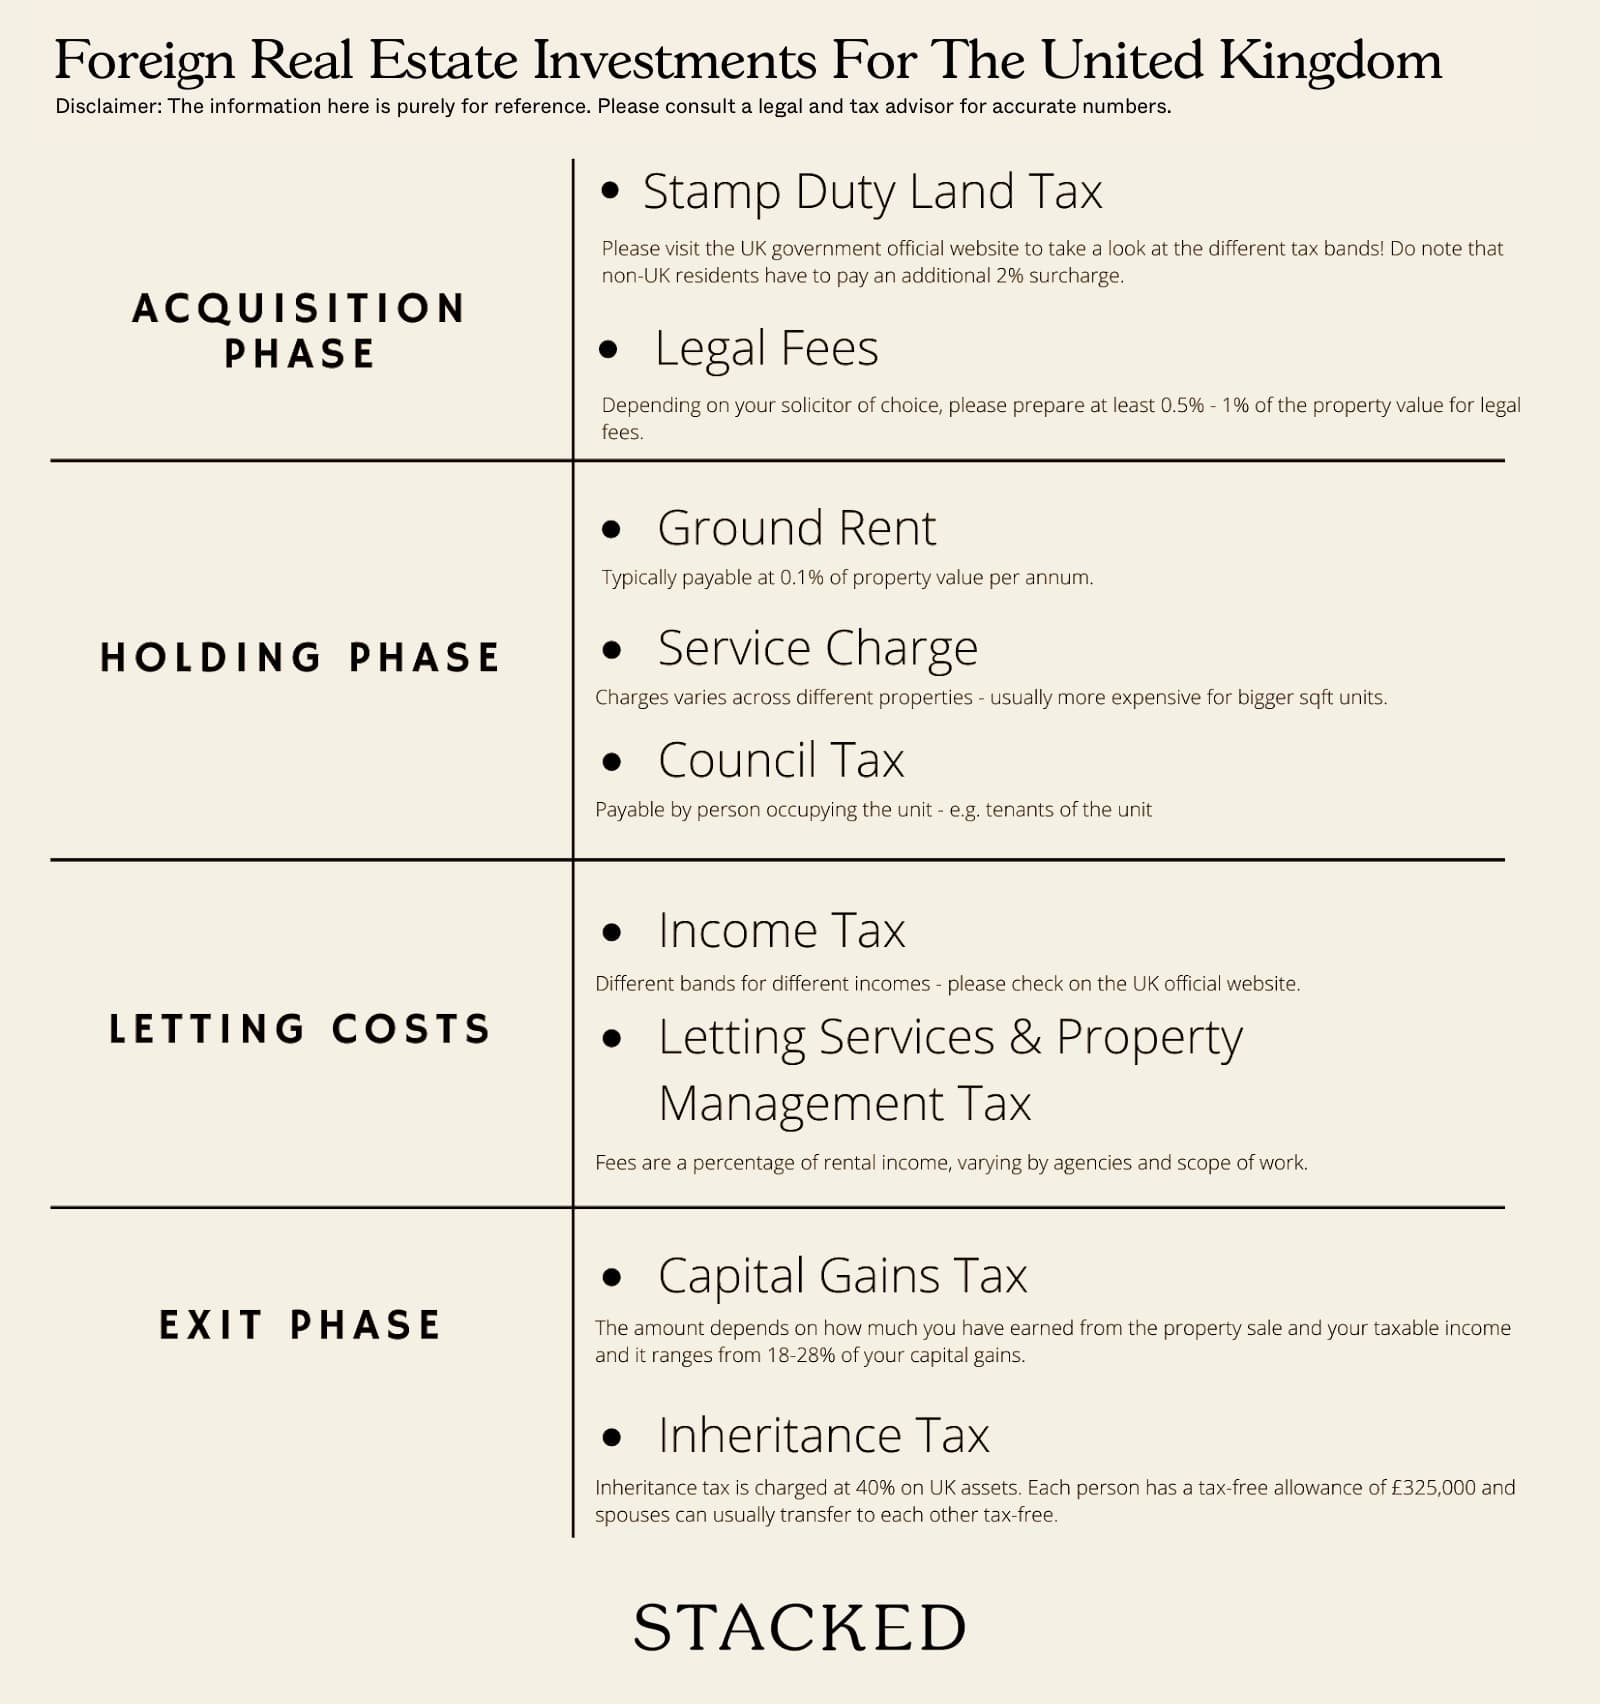 Foreign Real Estate Investments For The United Kingdom